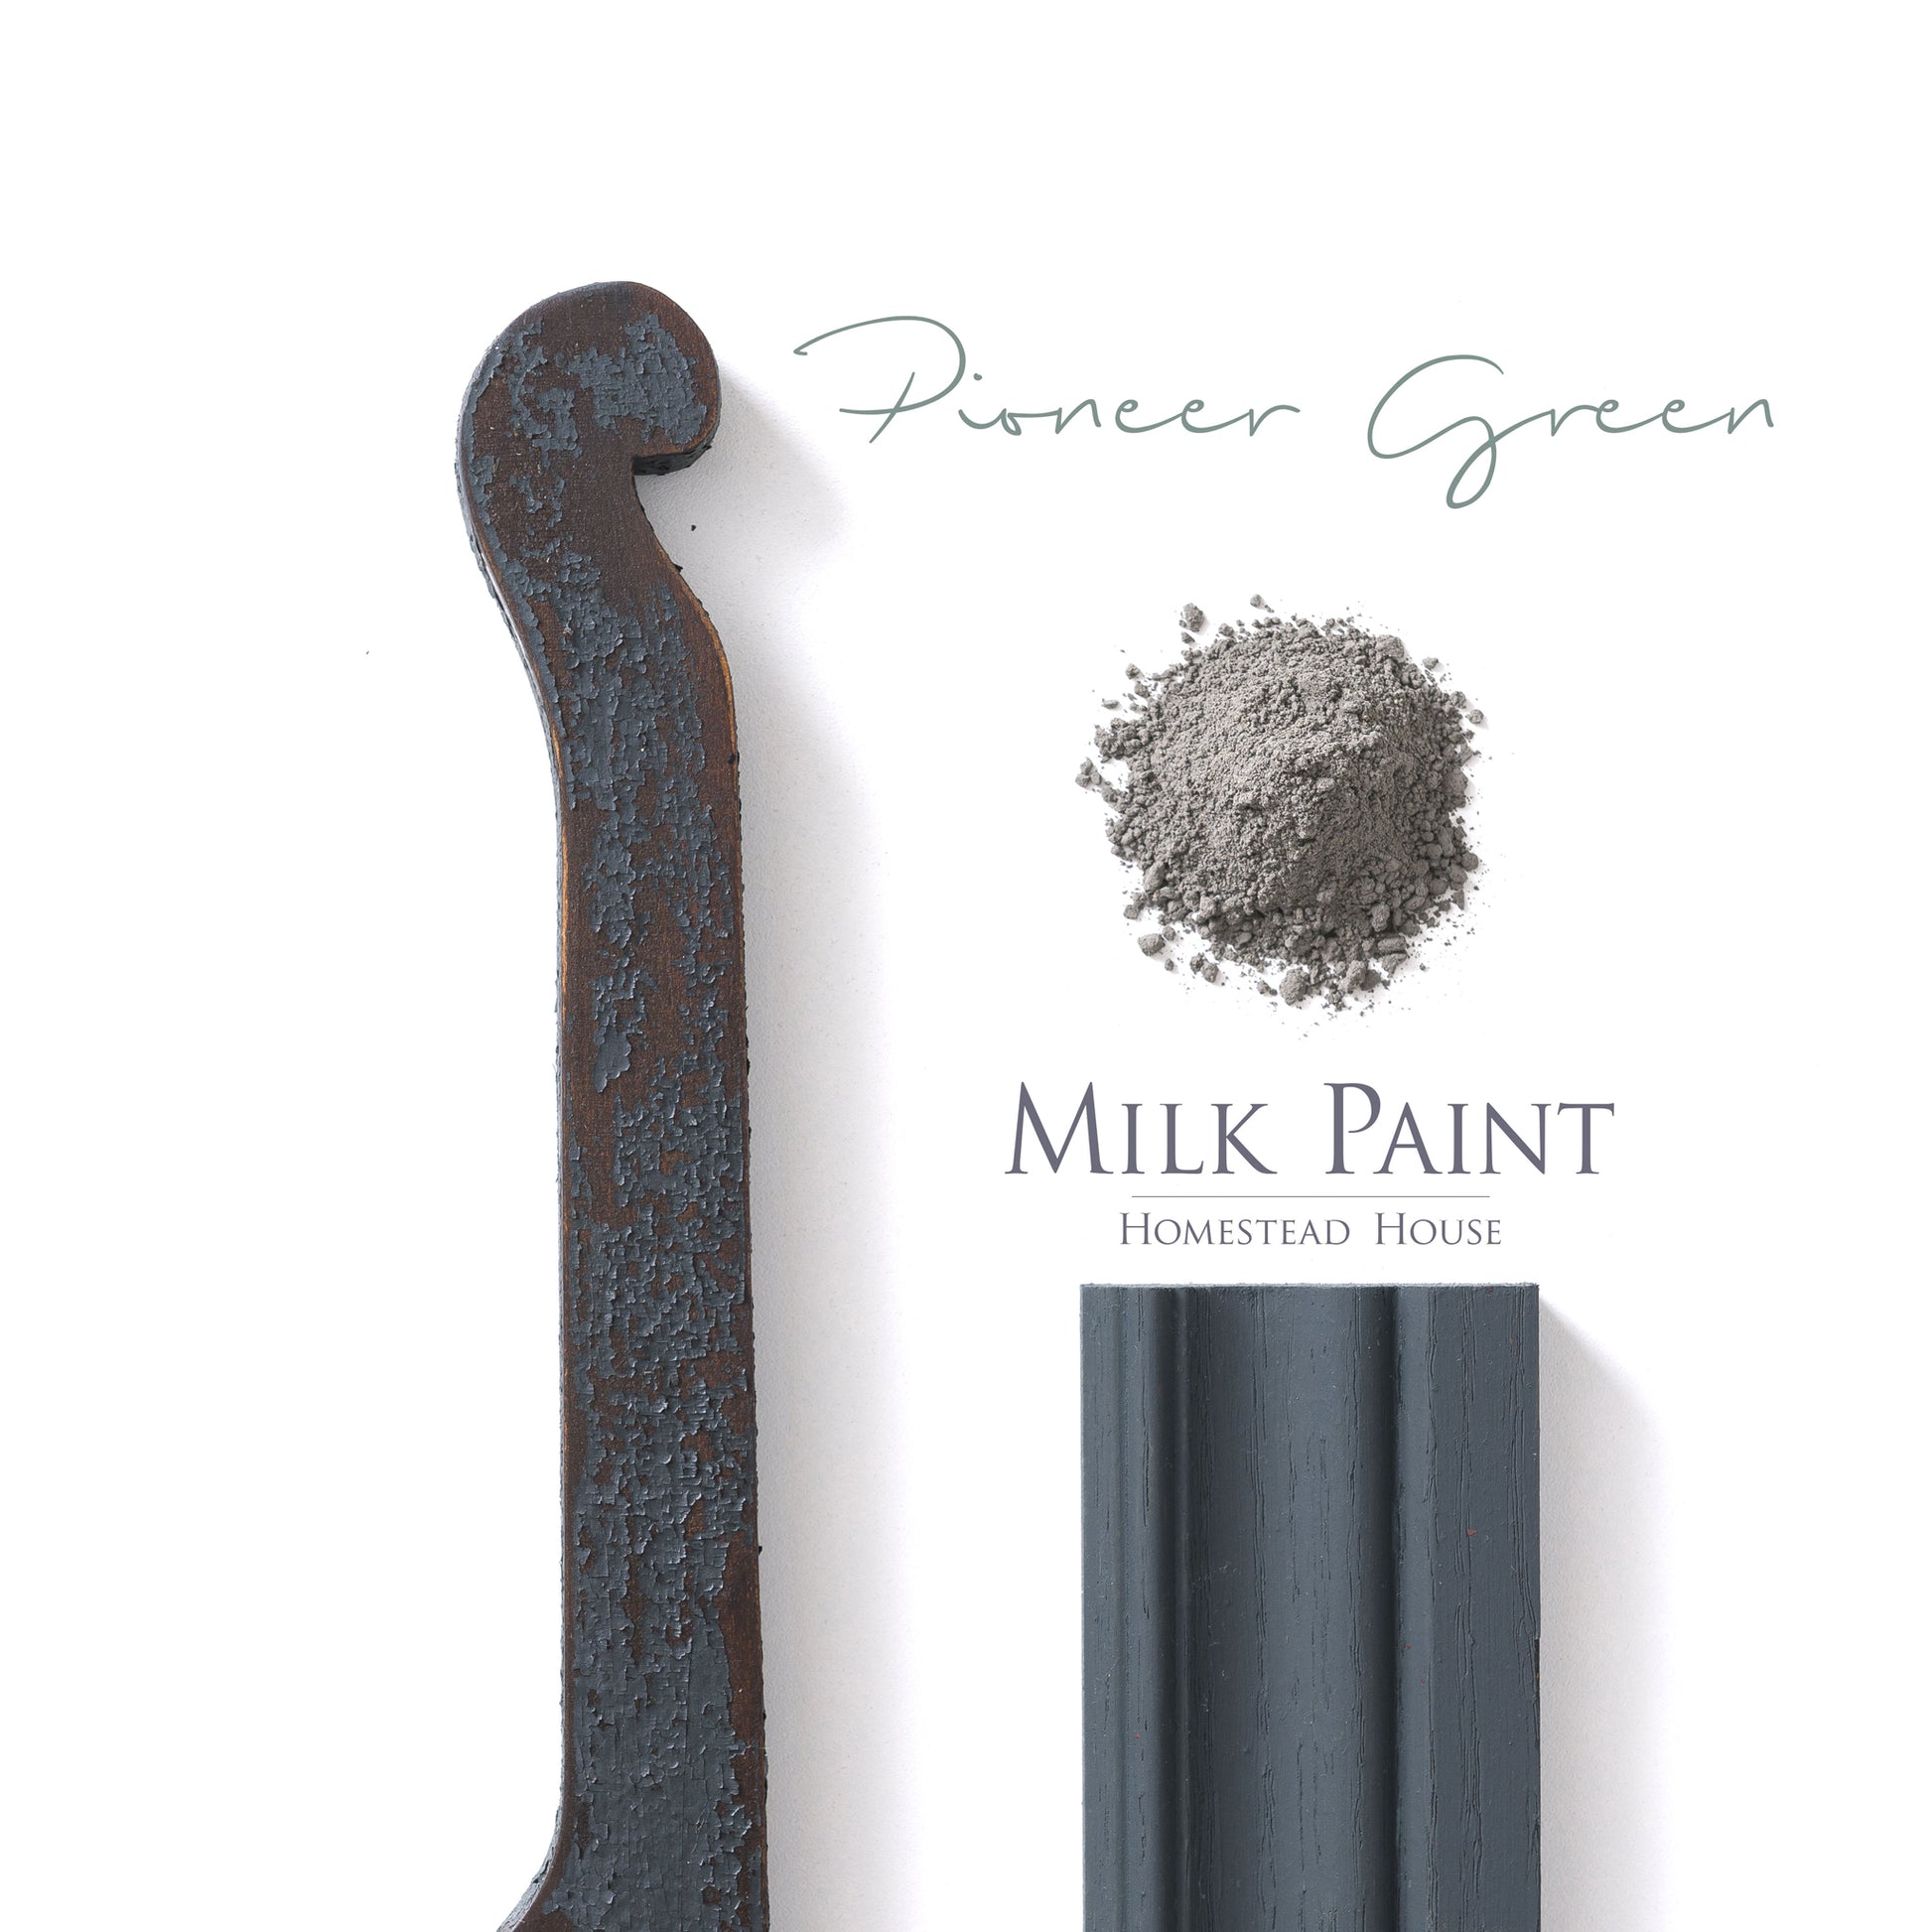 Milk Paint from Homestead House in Pioneer Green - our deepest darkest green which has a black hue. | homesteadhouse.ca